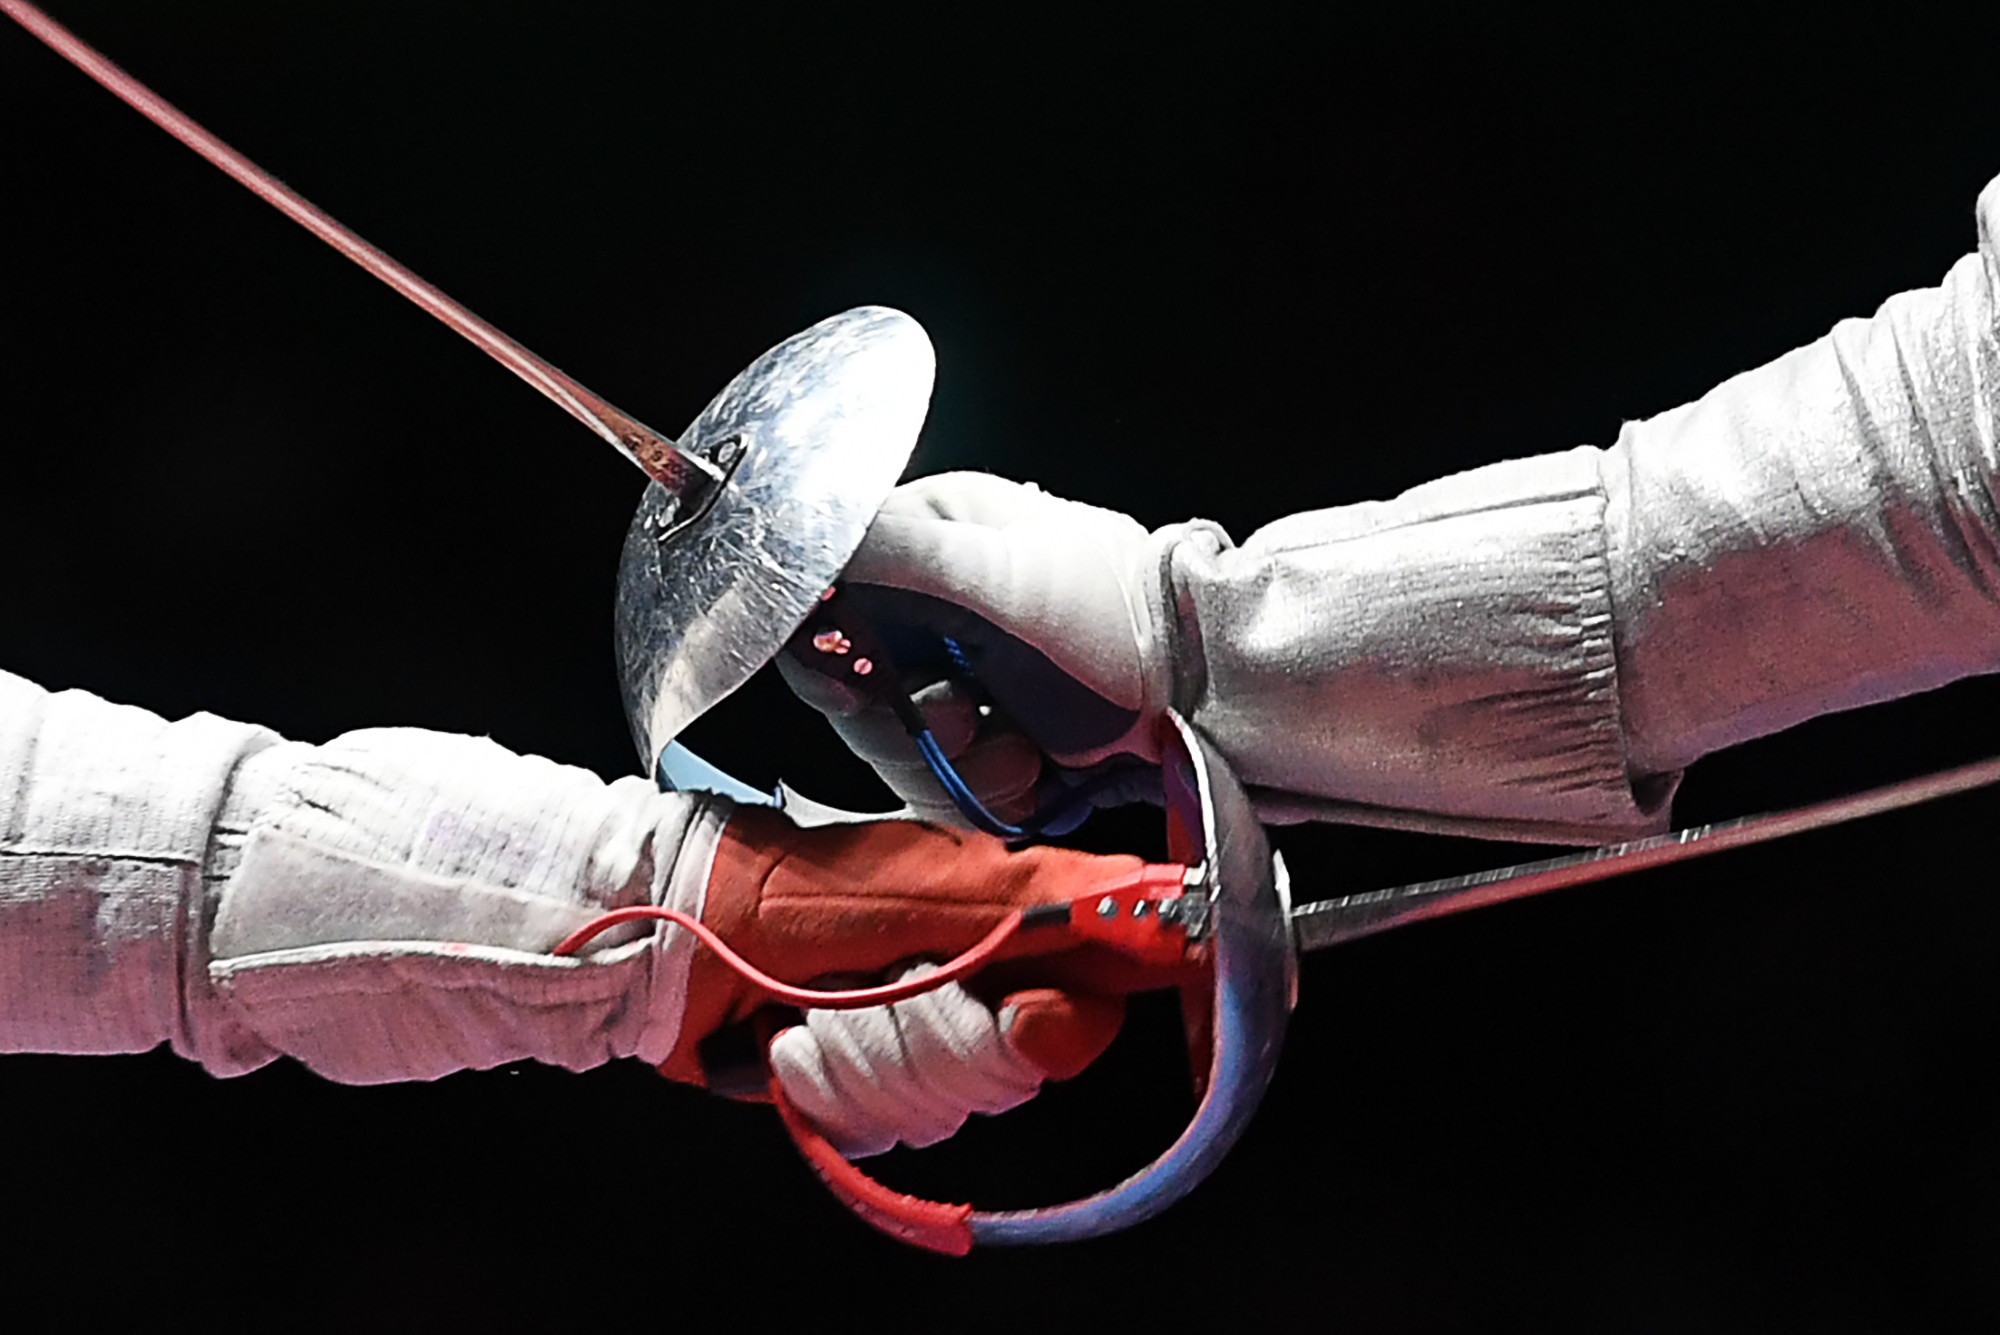 Home nations dominate on day one of Commonwealth Fencing Championships in London